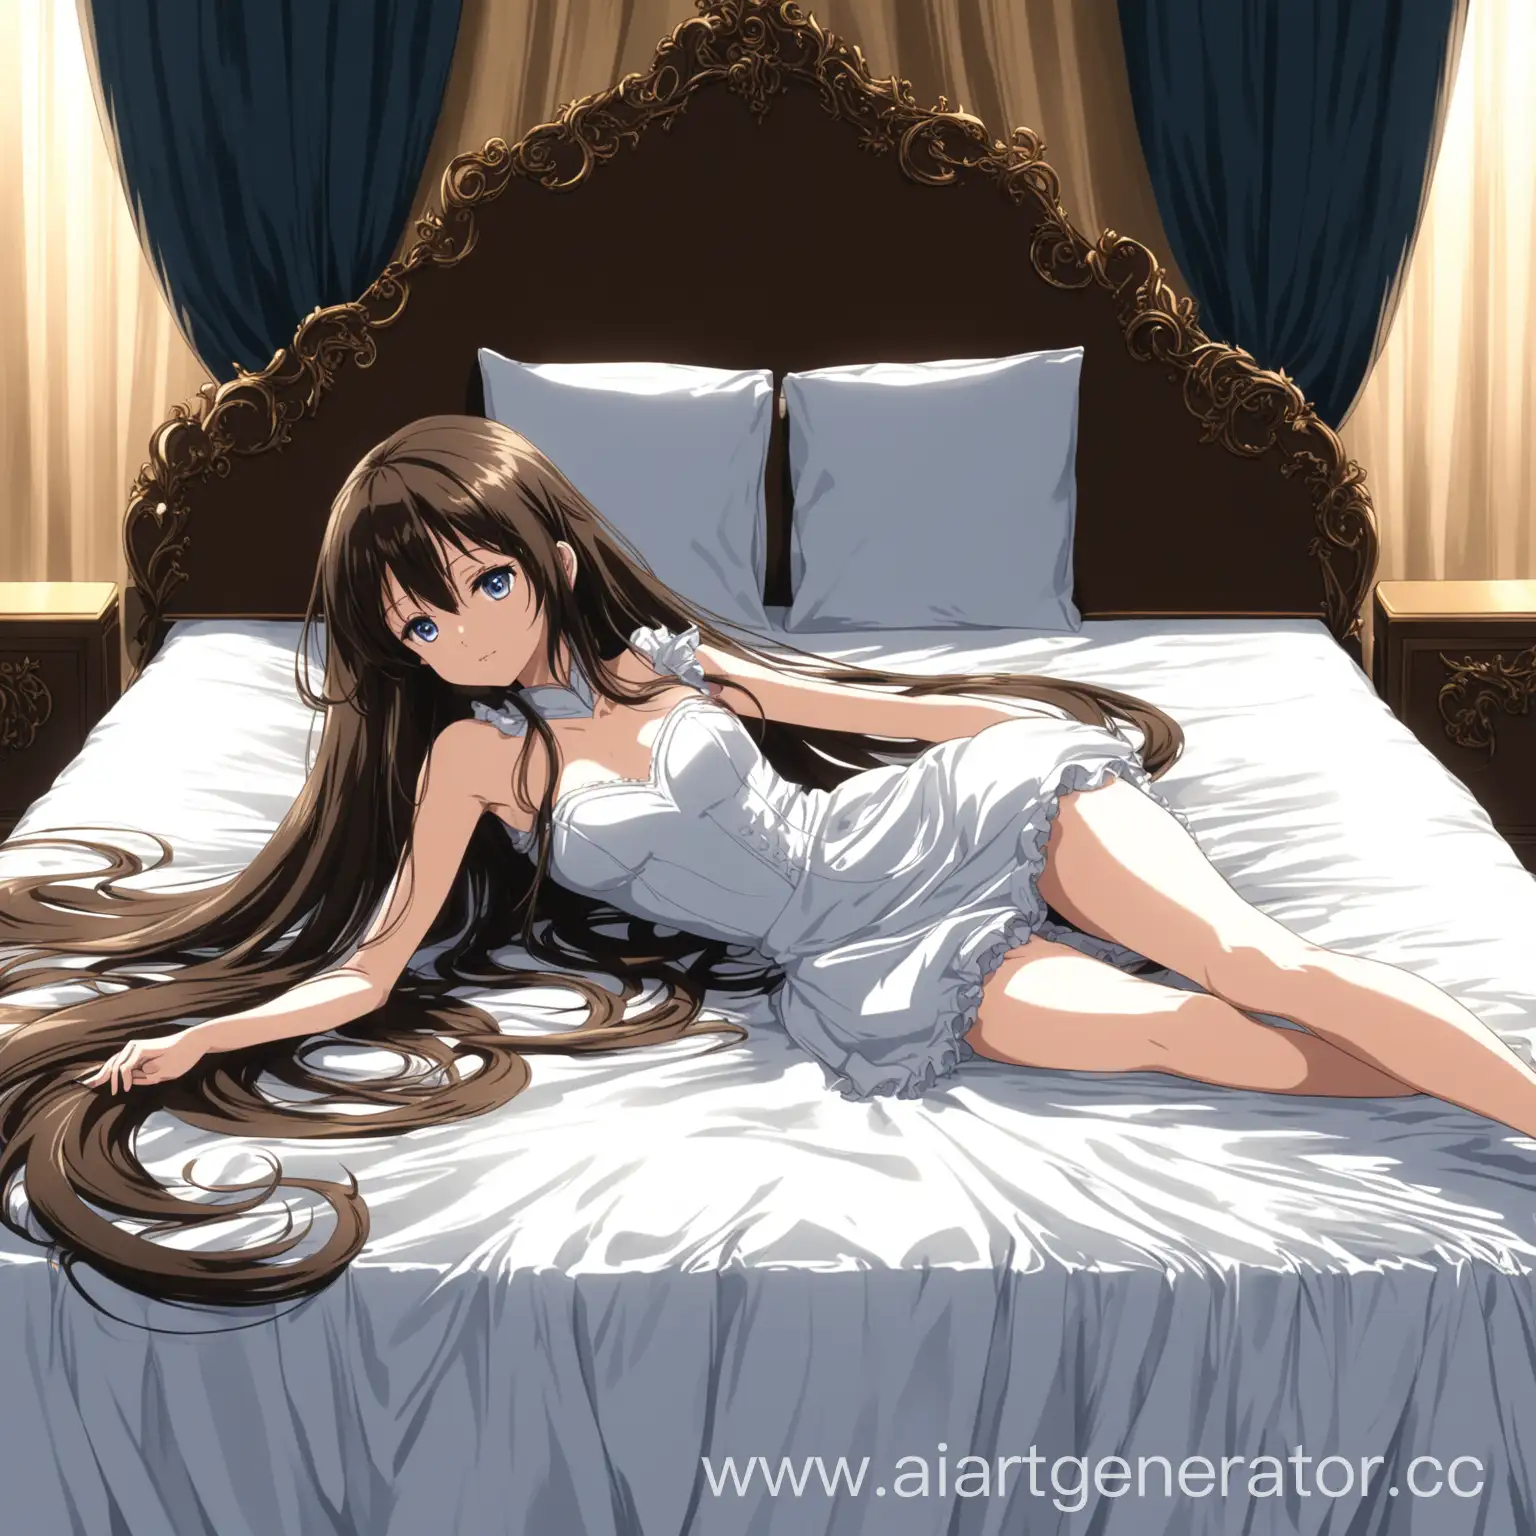 Anime girl lies on the bed in an elegant shape with long hair